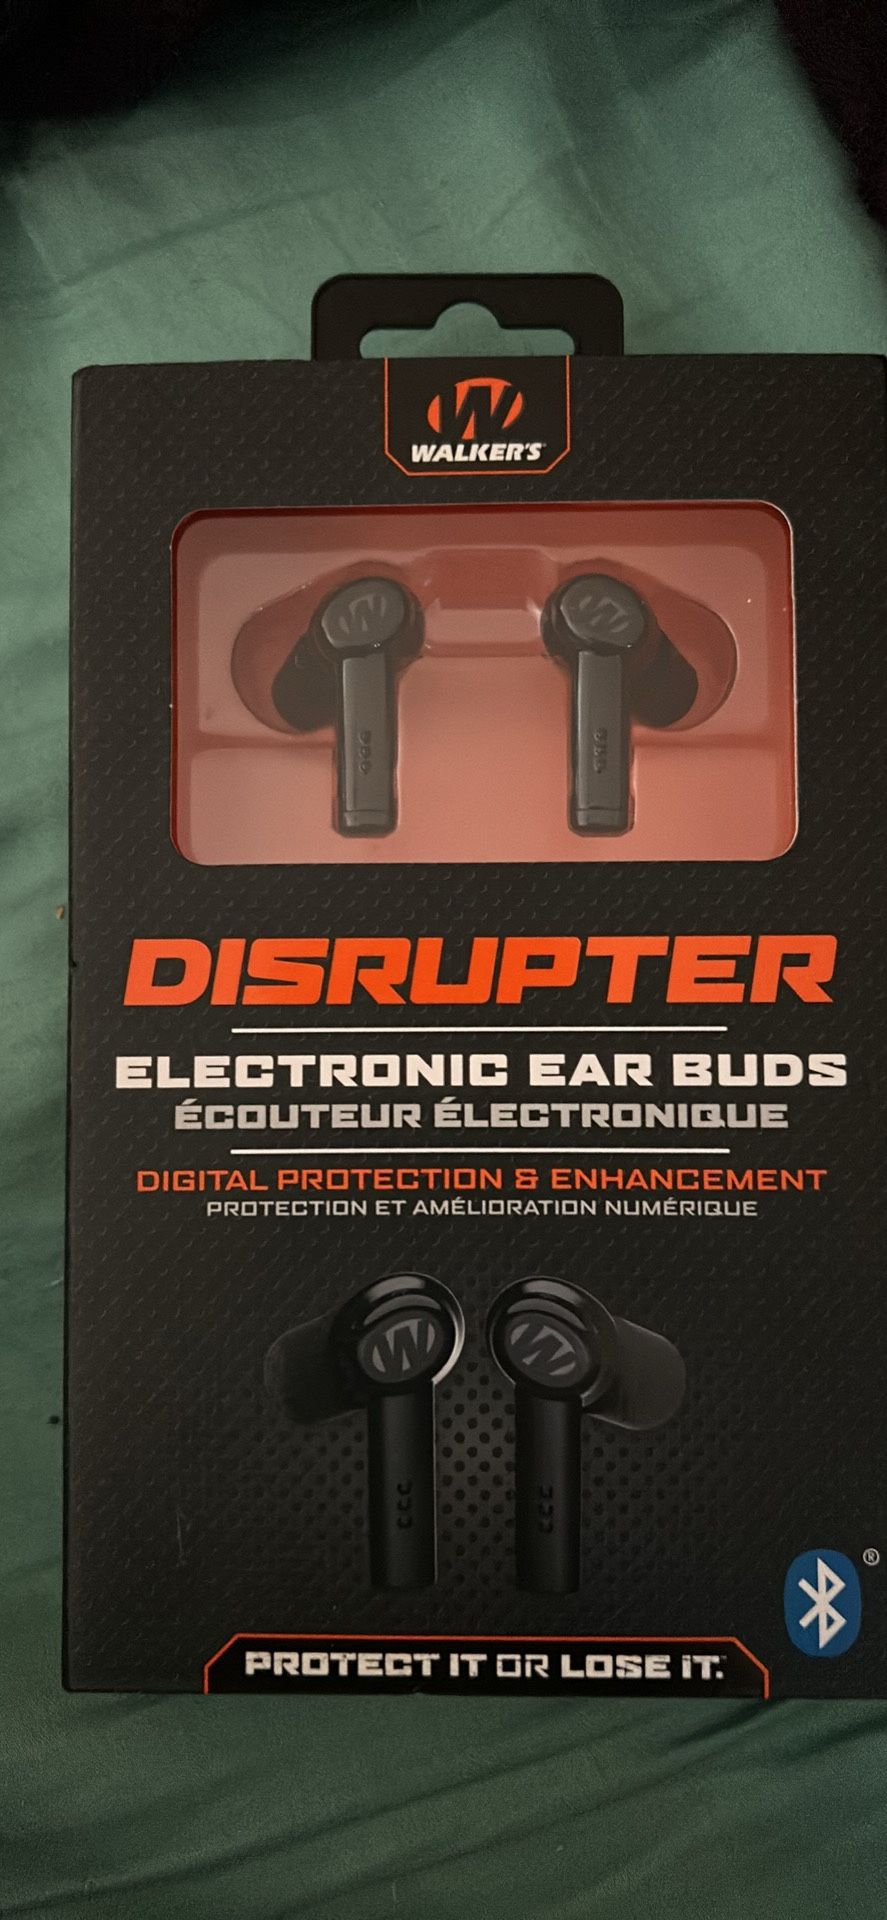 DISRUPTER. Electronic Ear Buds